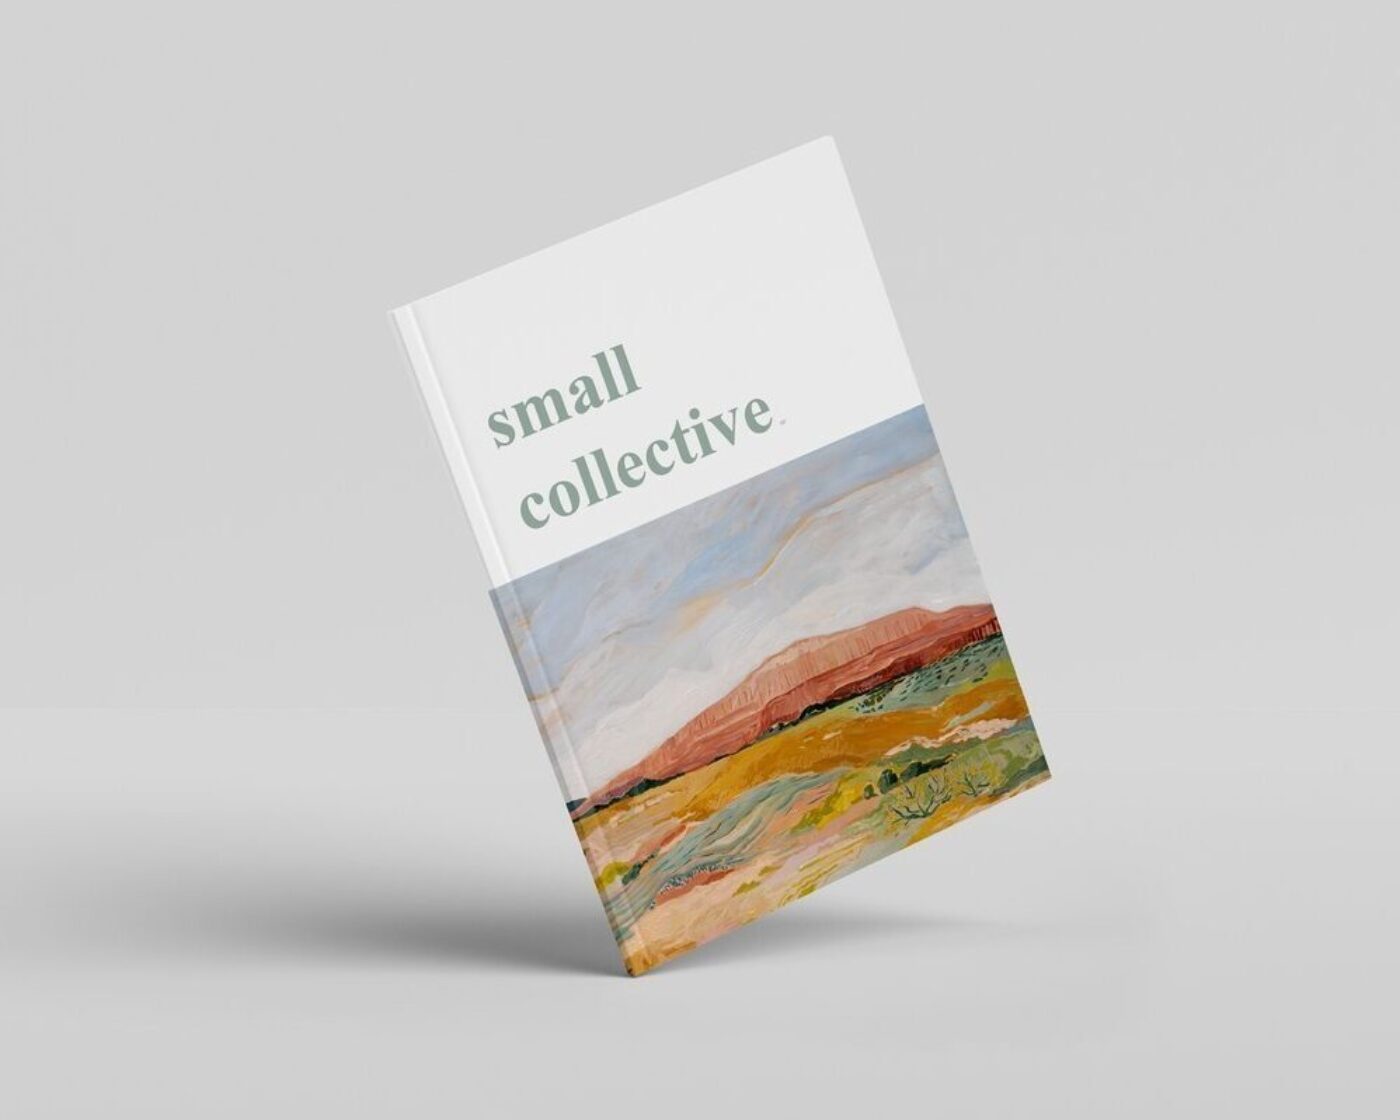 Small collective 118566514 325421131849227 8358425424425229251 n